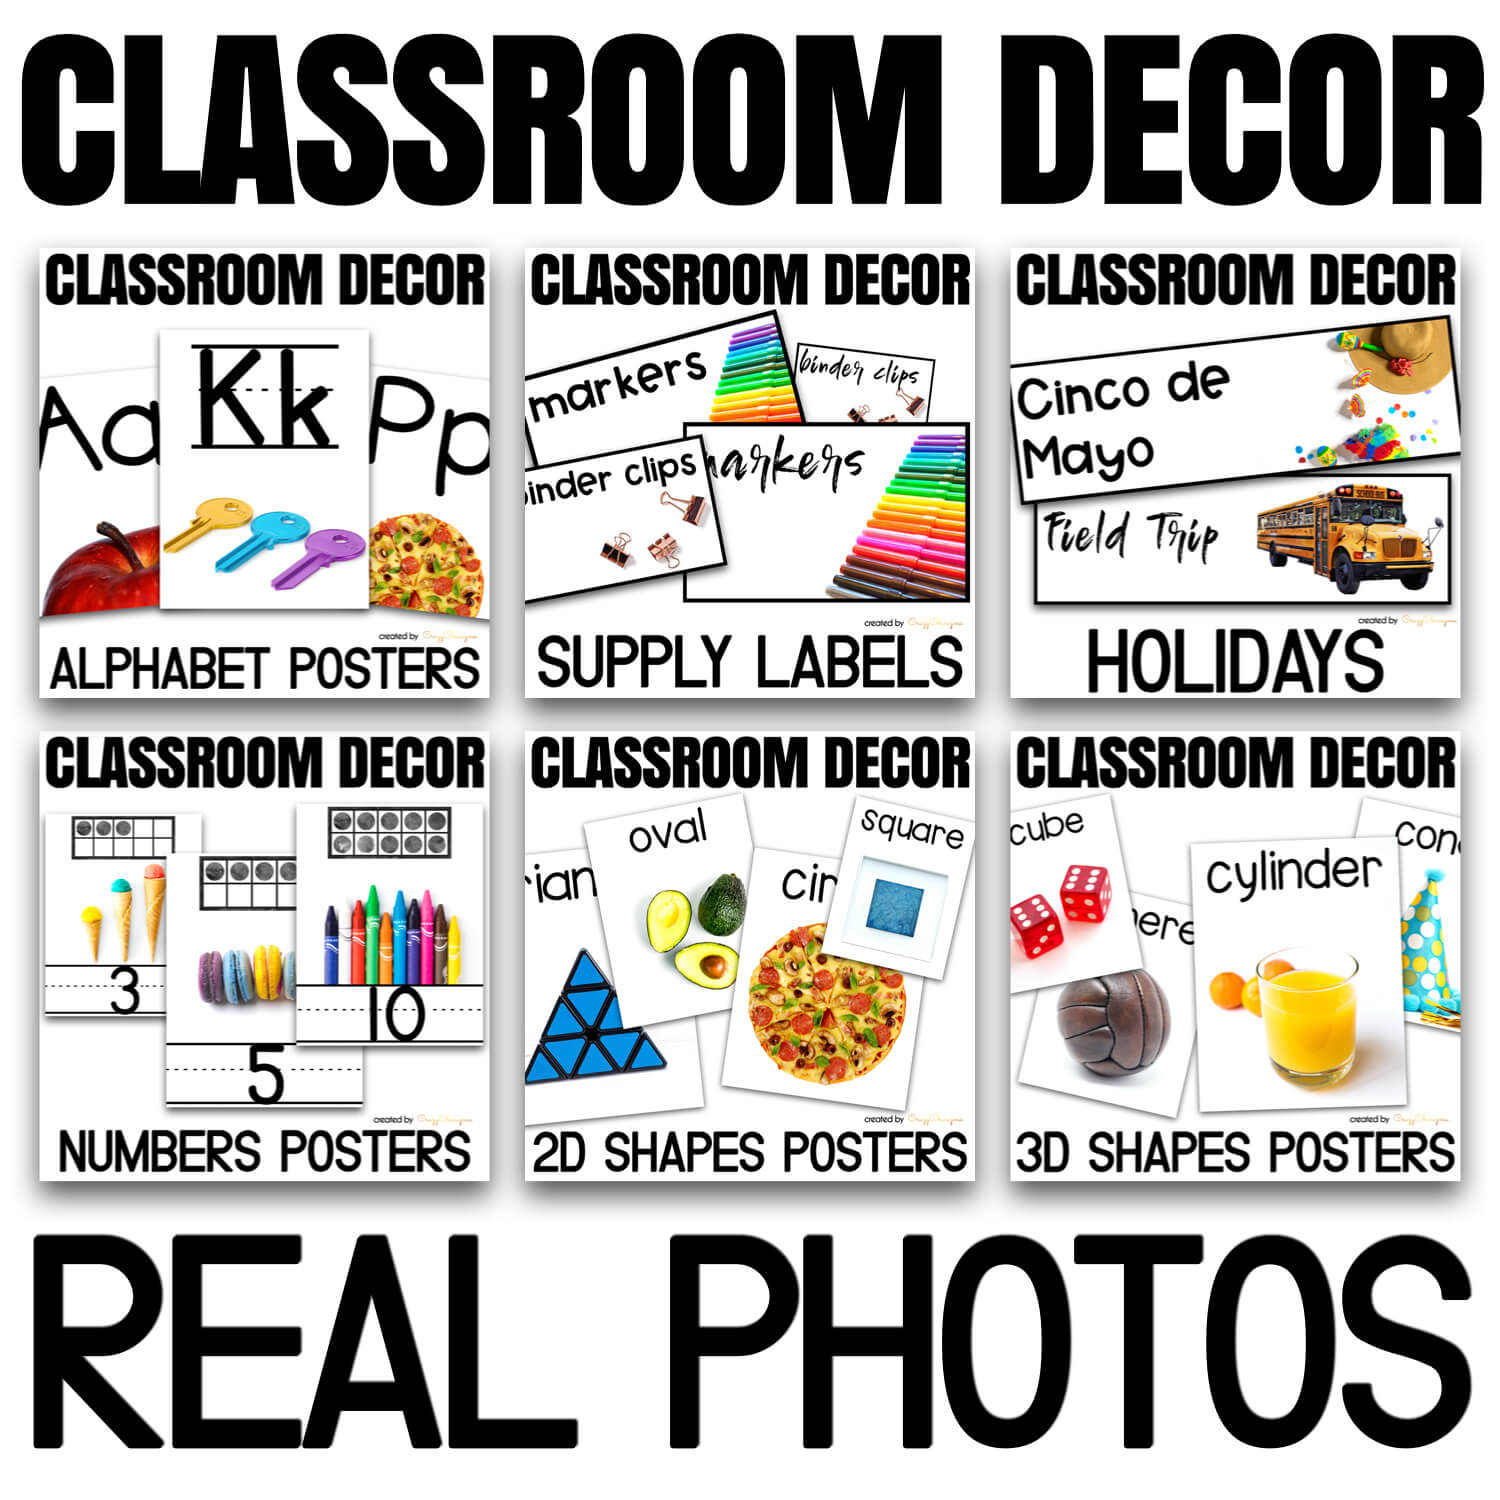 Looking for stylish classroom decor? With real photos? This huge bundle is what you need and will love! There are over 90+ pages: alphabet posters, numbers posters, supply labels, holiday labels, 2D shape posters, 3D shape posters.